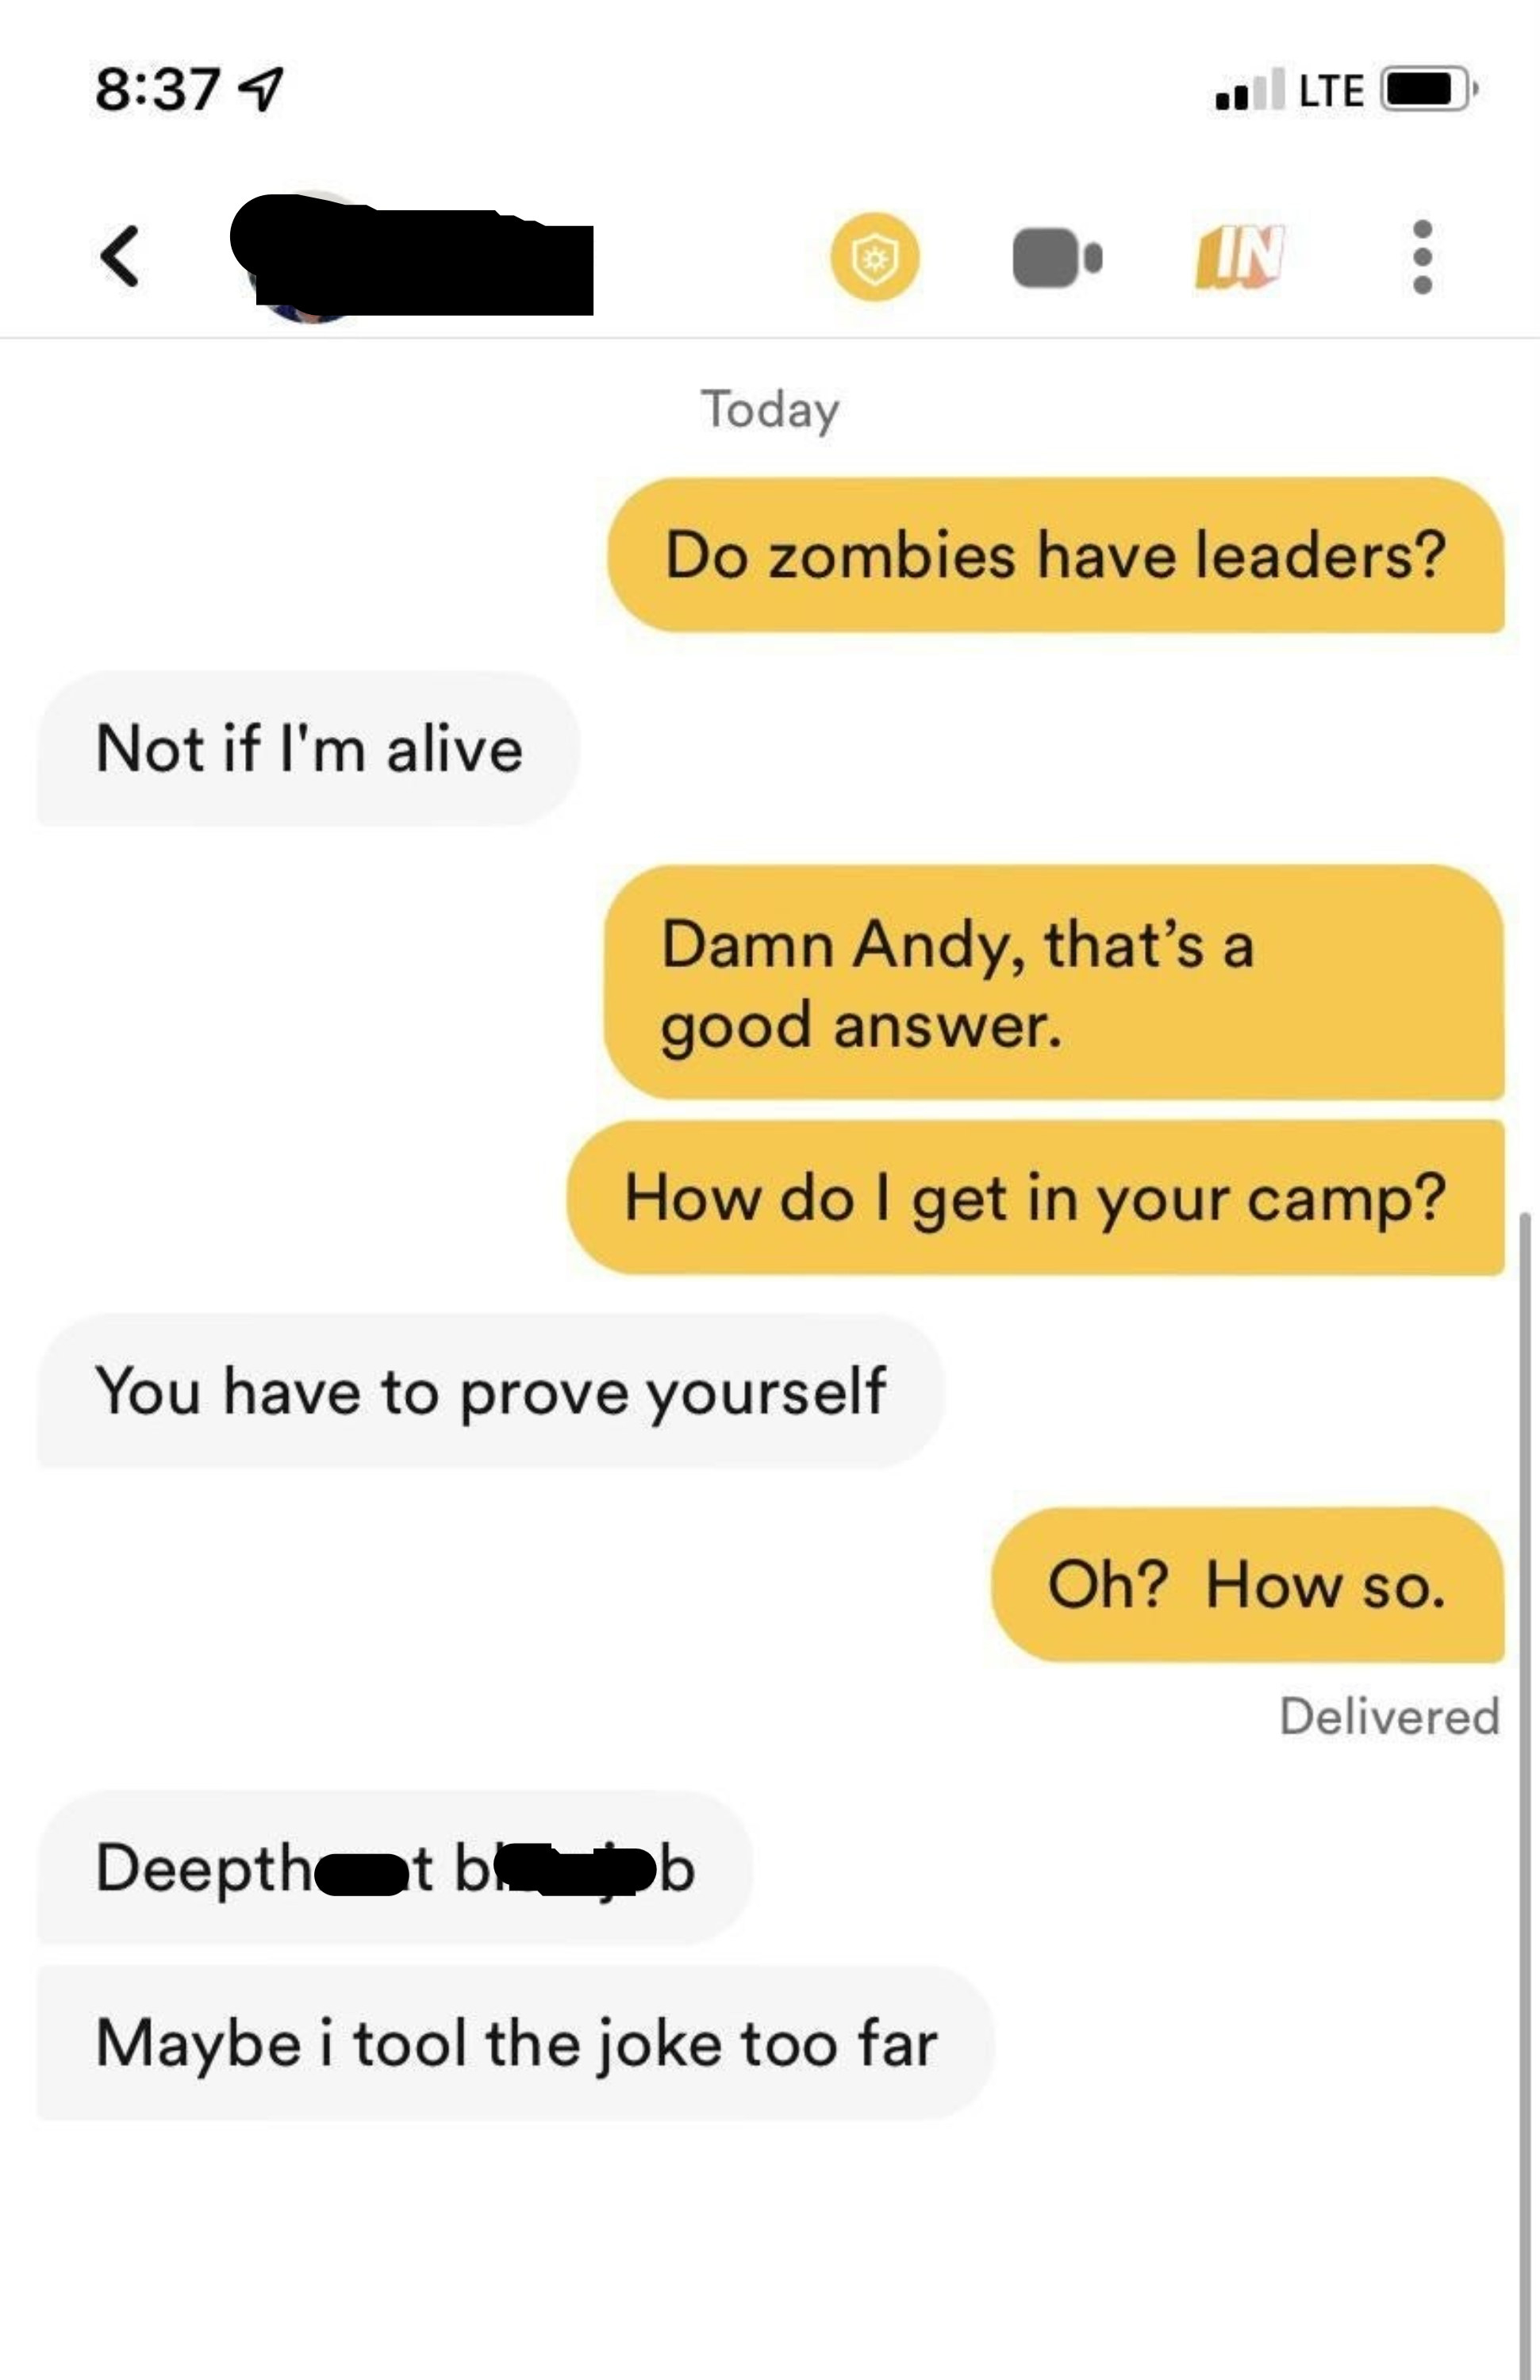 a match being offensive about the ways to get into his hypothetical zombie camp